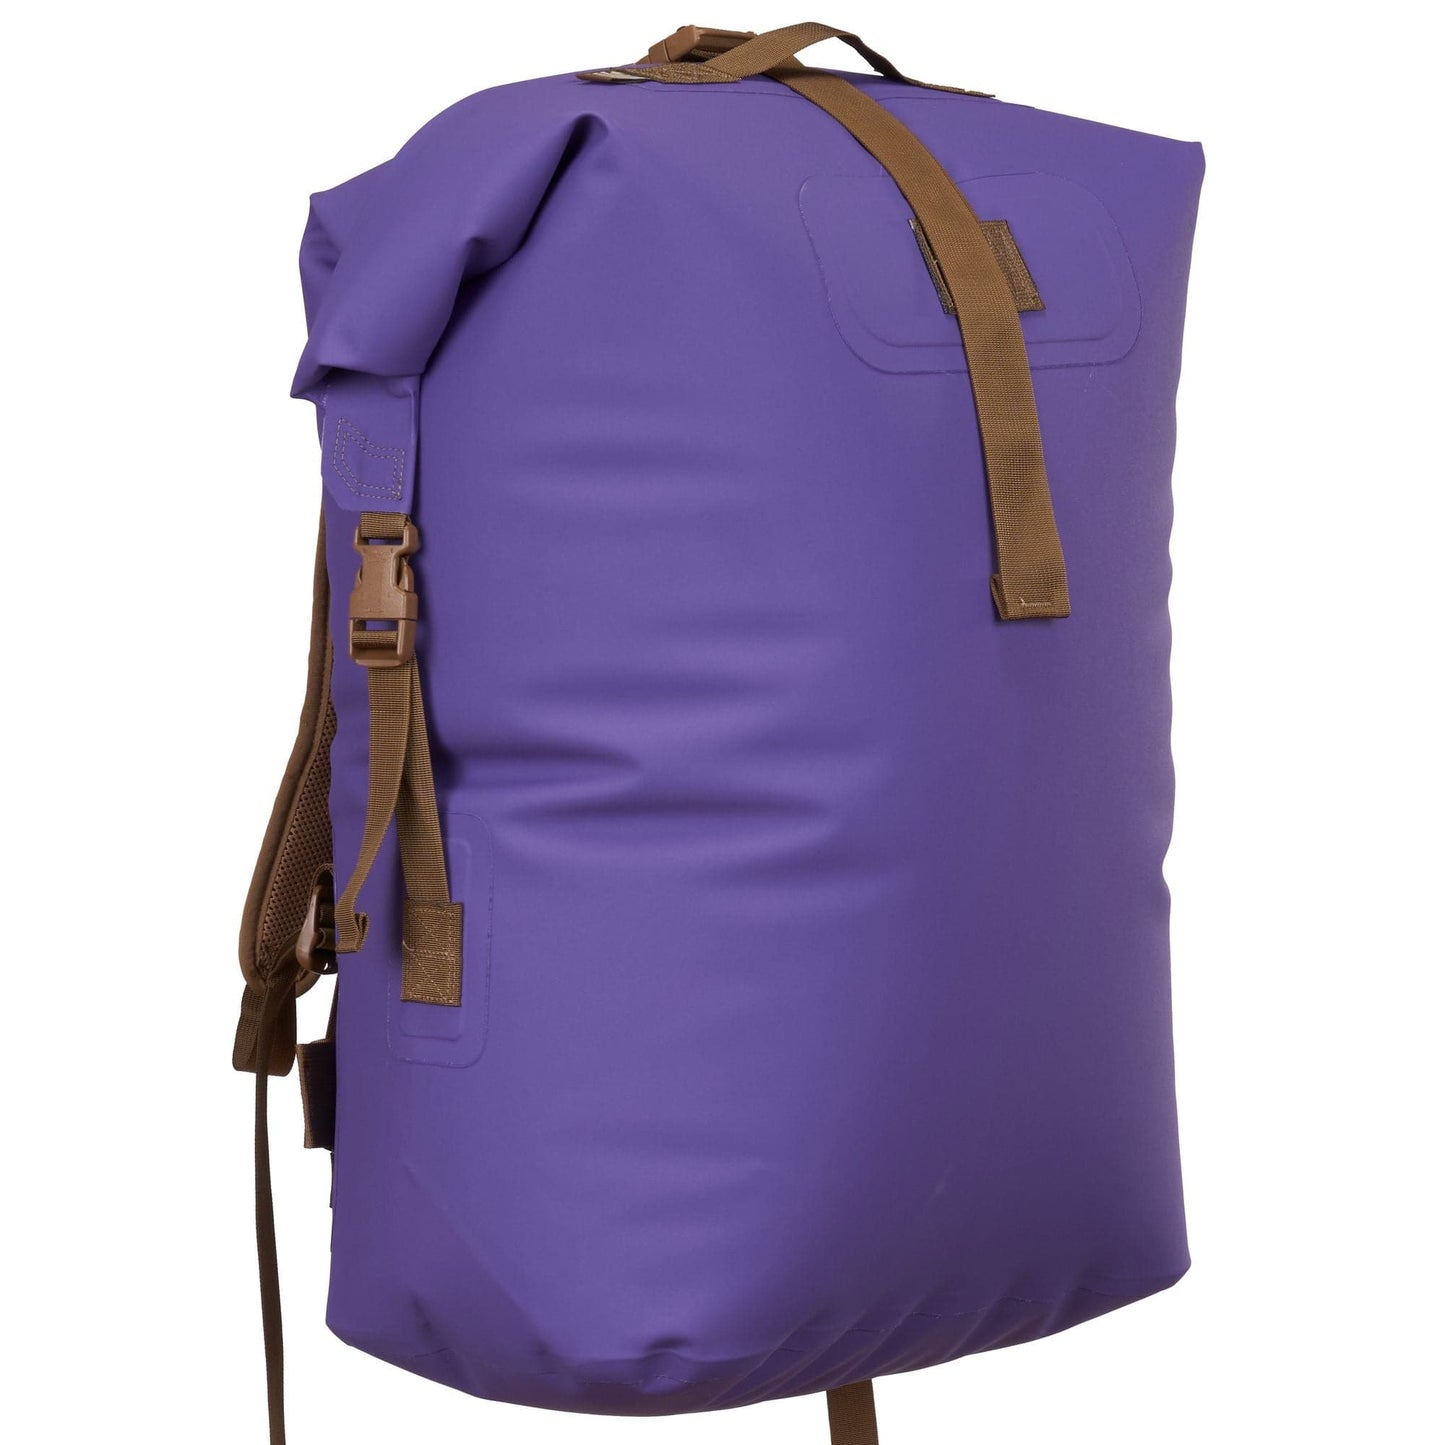 Featuring the Westwater Drypack dry bag manufactured by Watershed shown here from one angle.